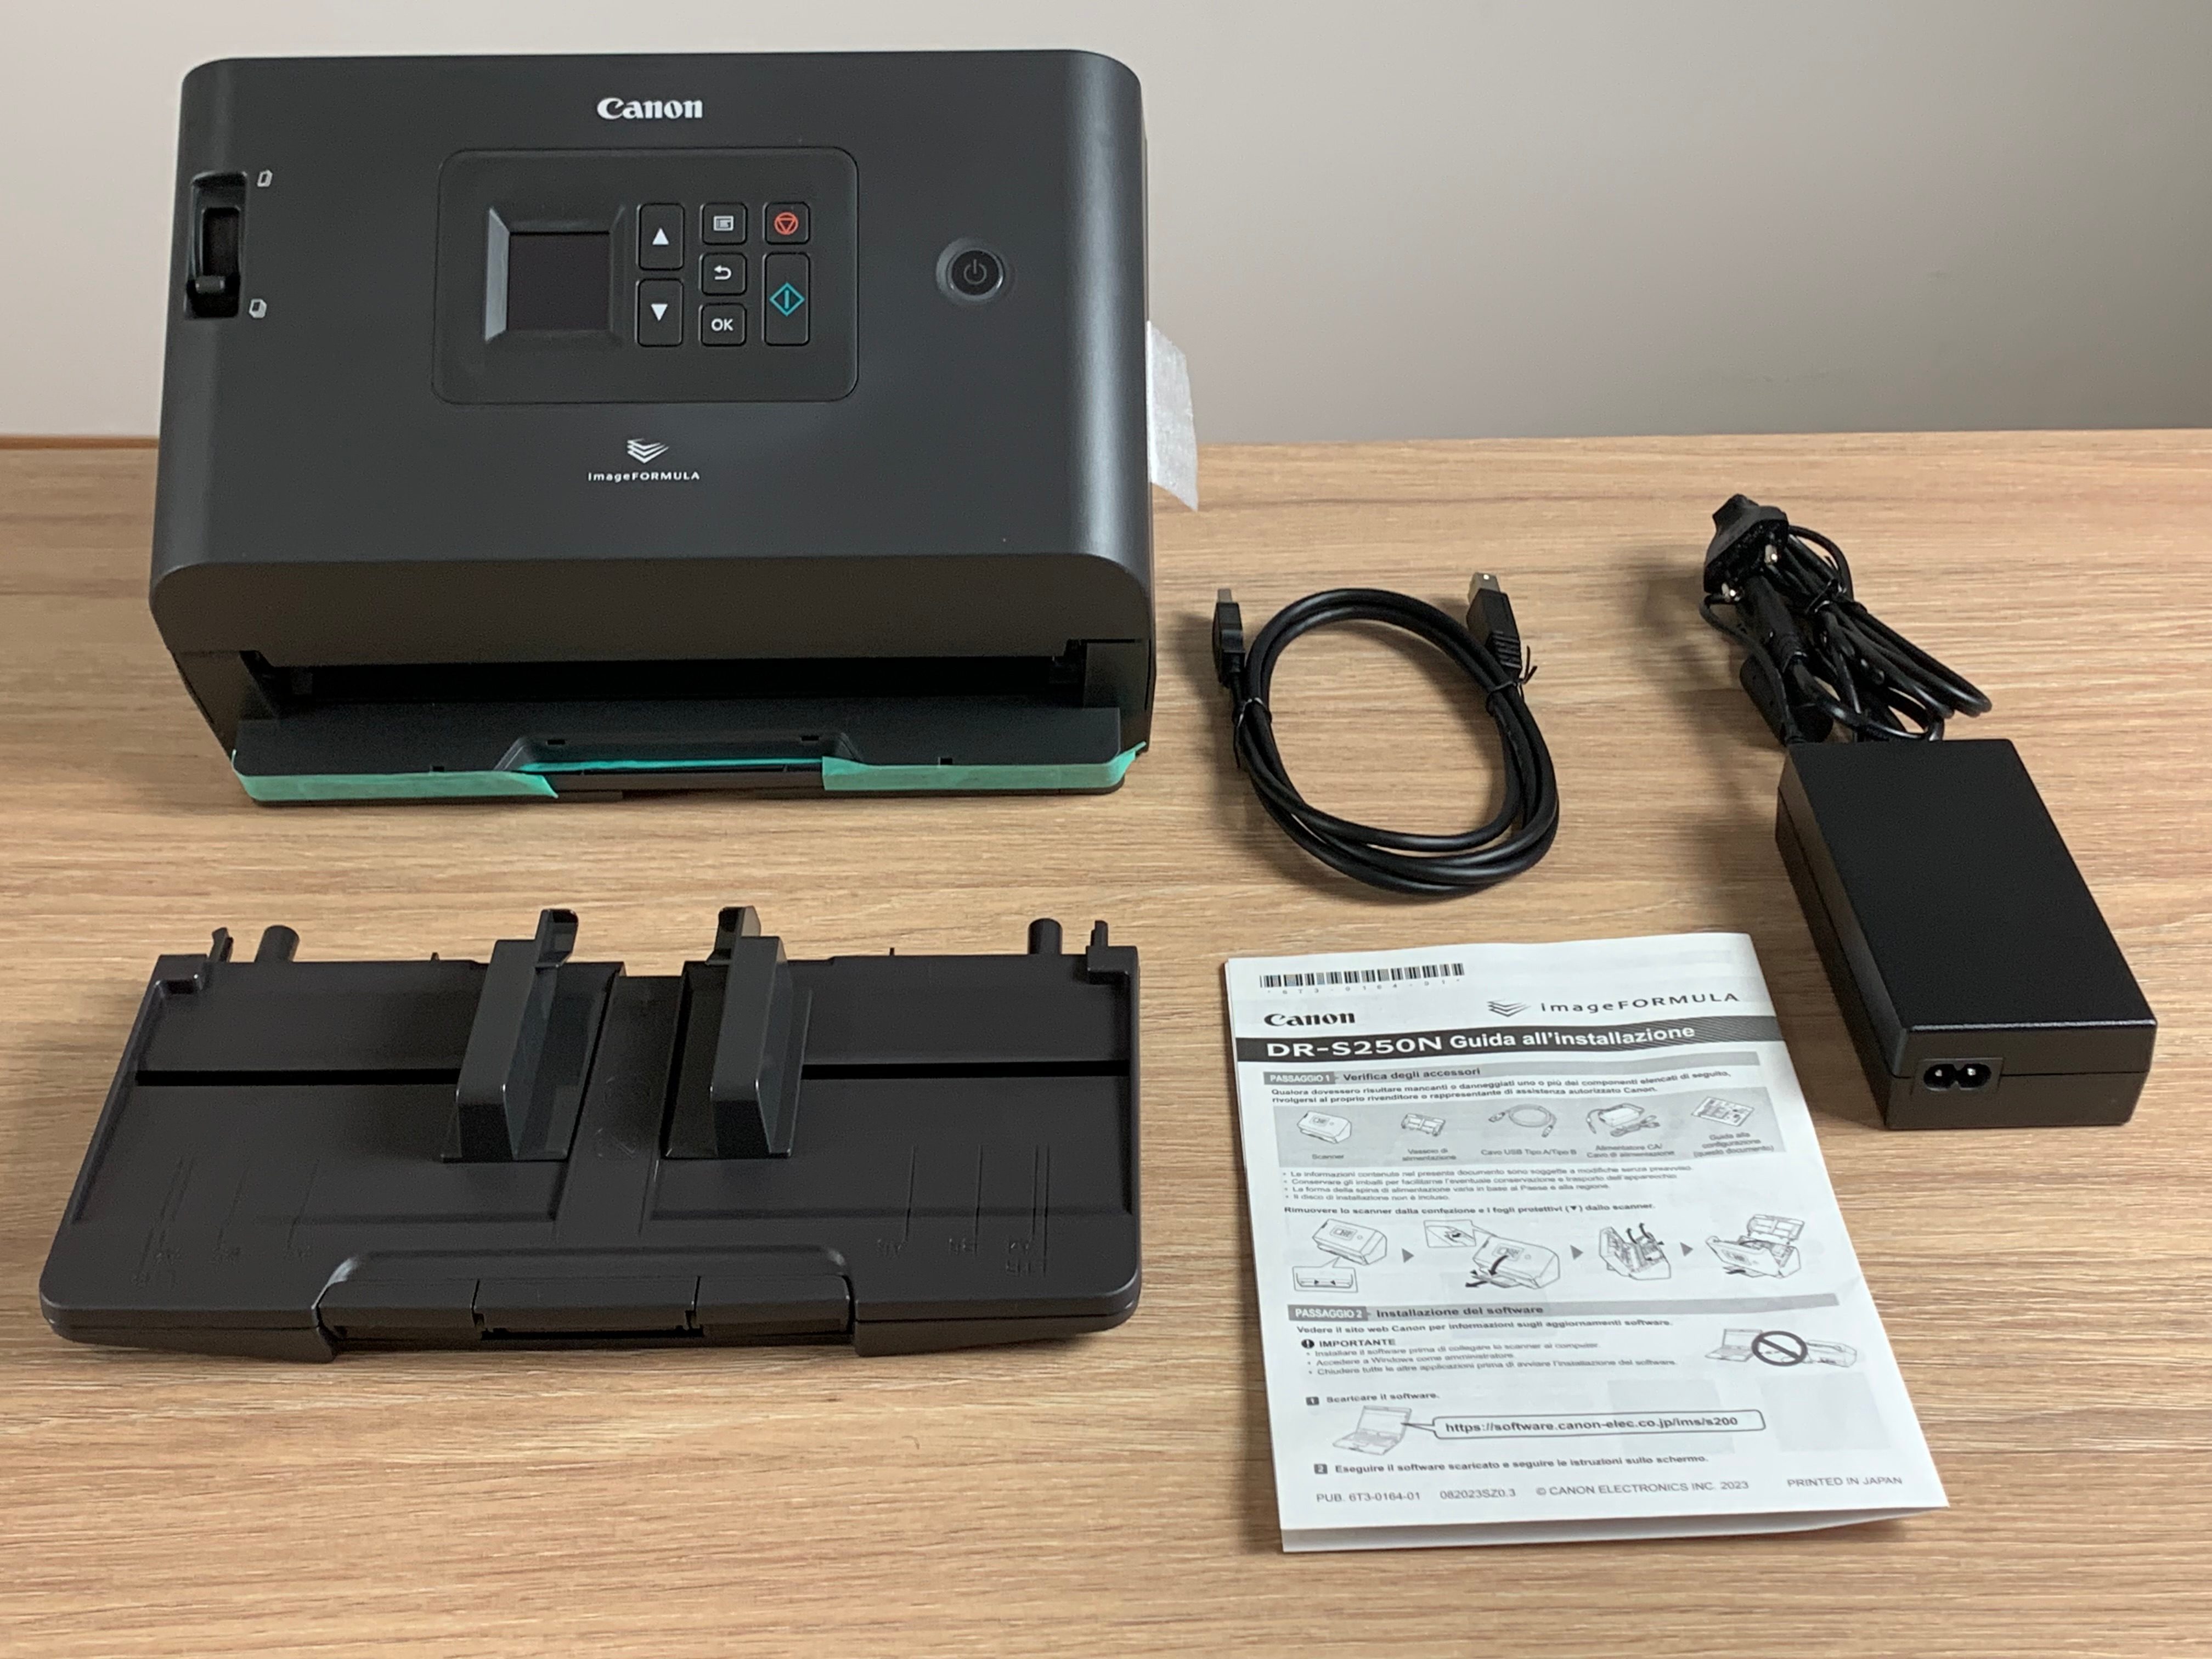 Canon imageFORMULA DR-S250N Lieferumfang